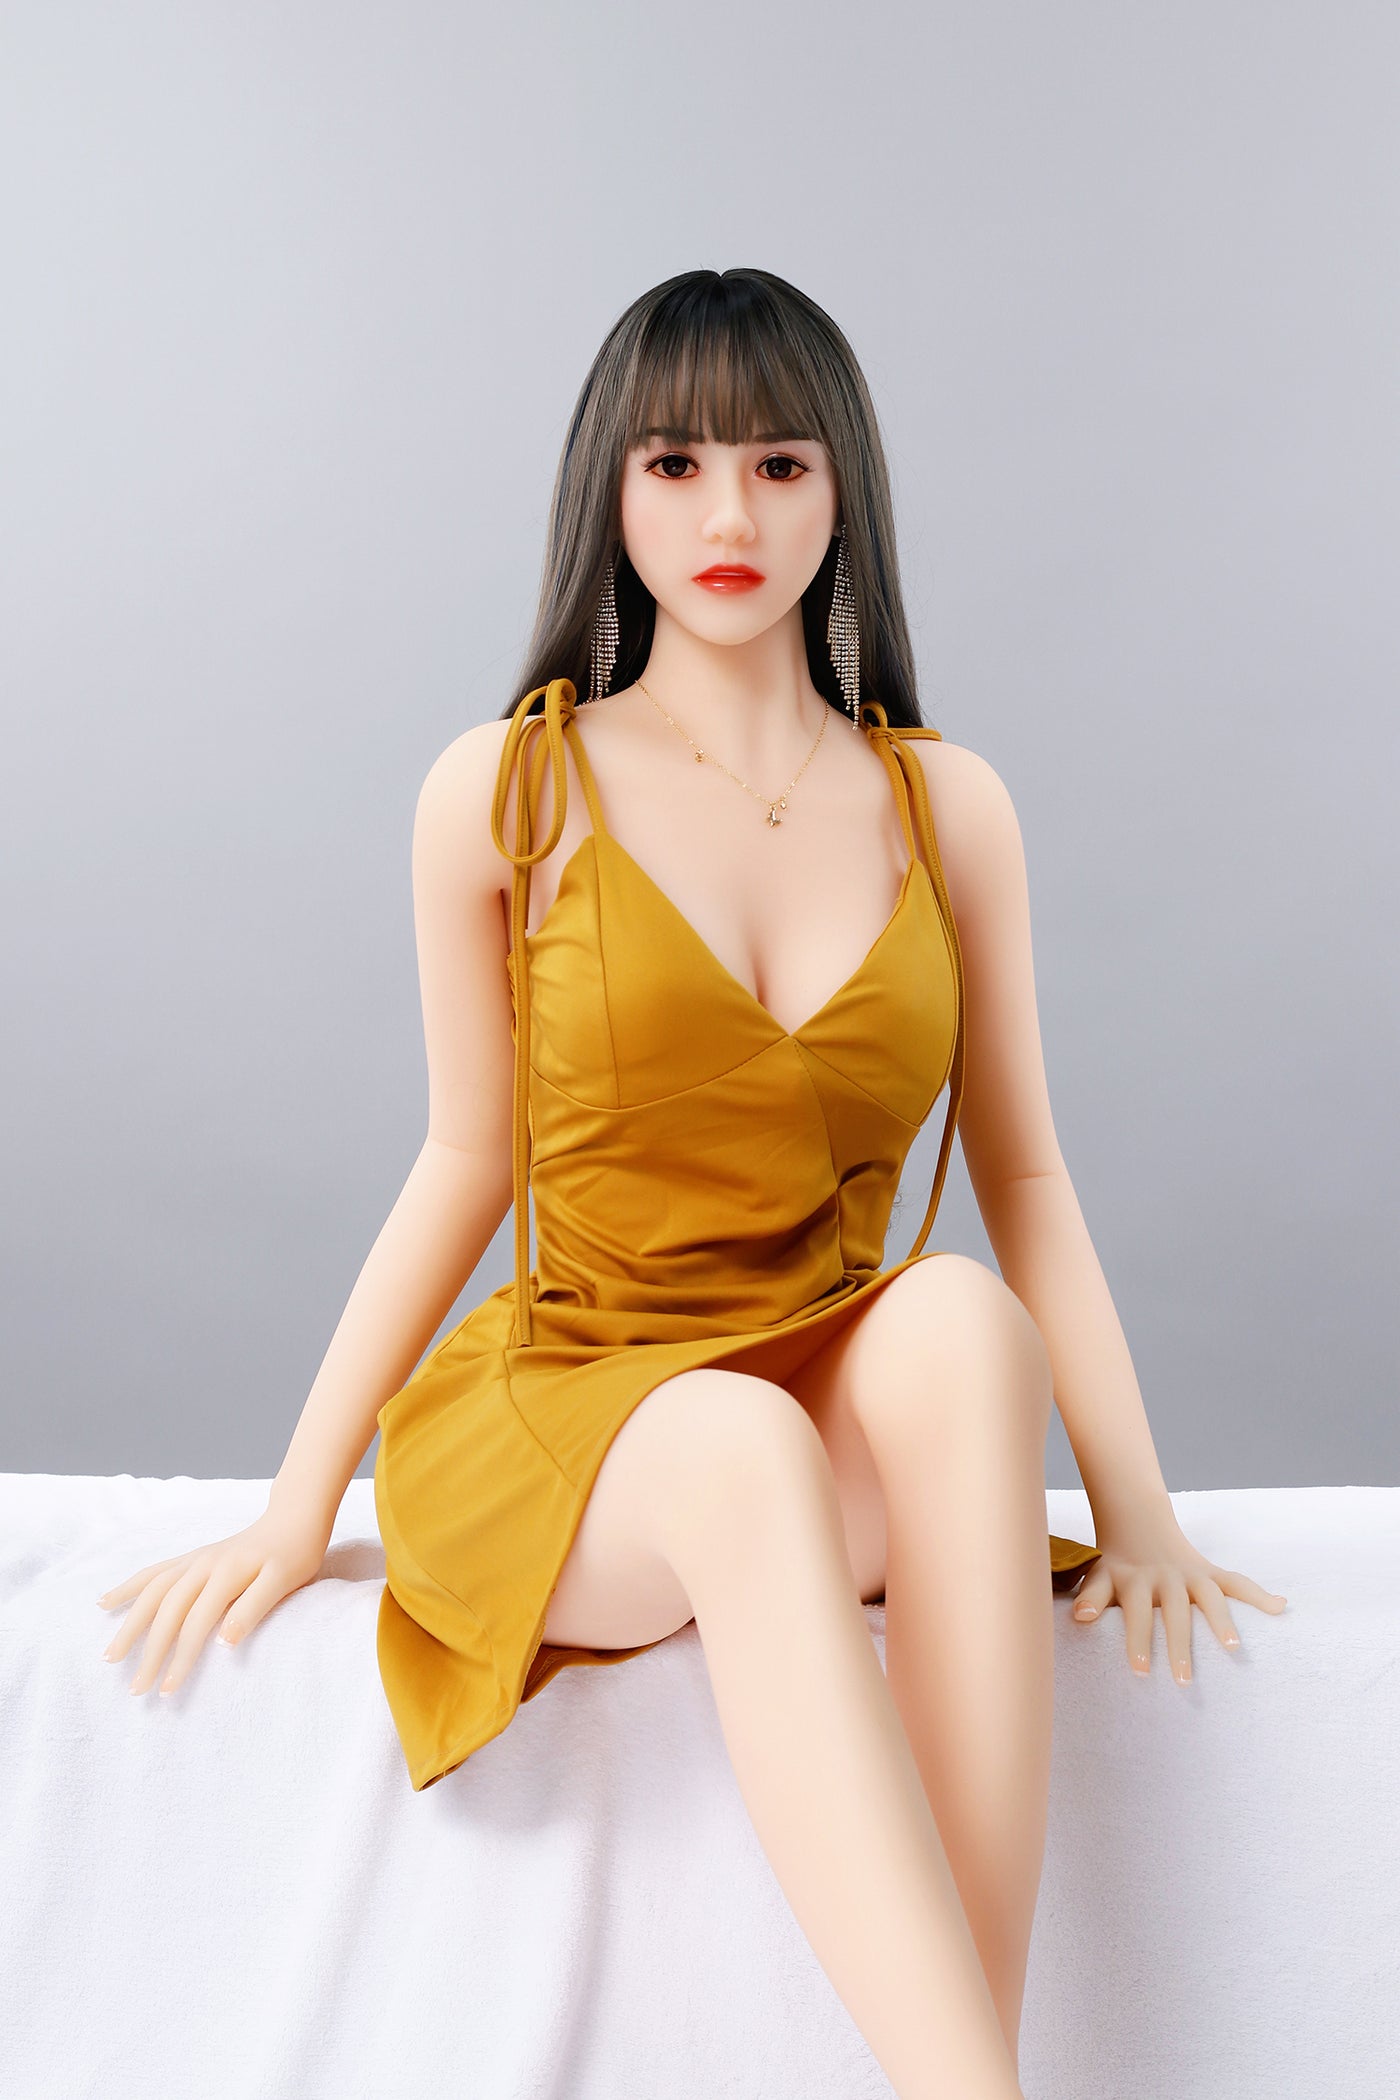 Emilia - 5ft5in (165cm) Slender Chinese Young Girl Realistic Sex Doll